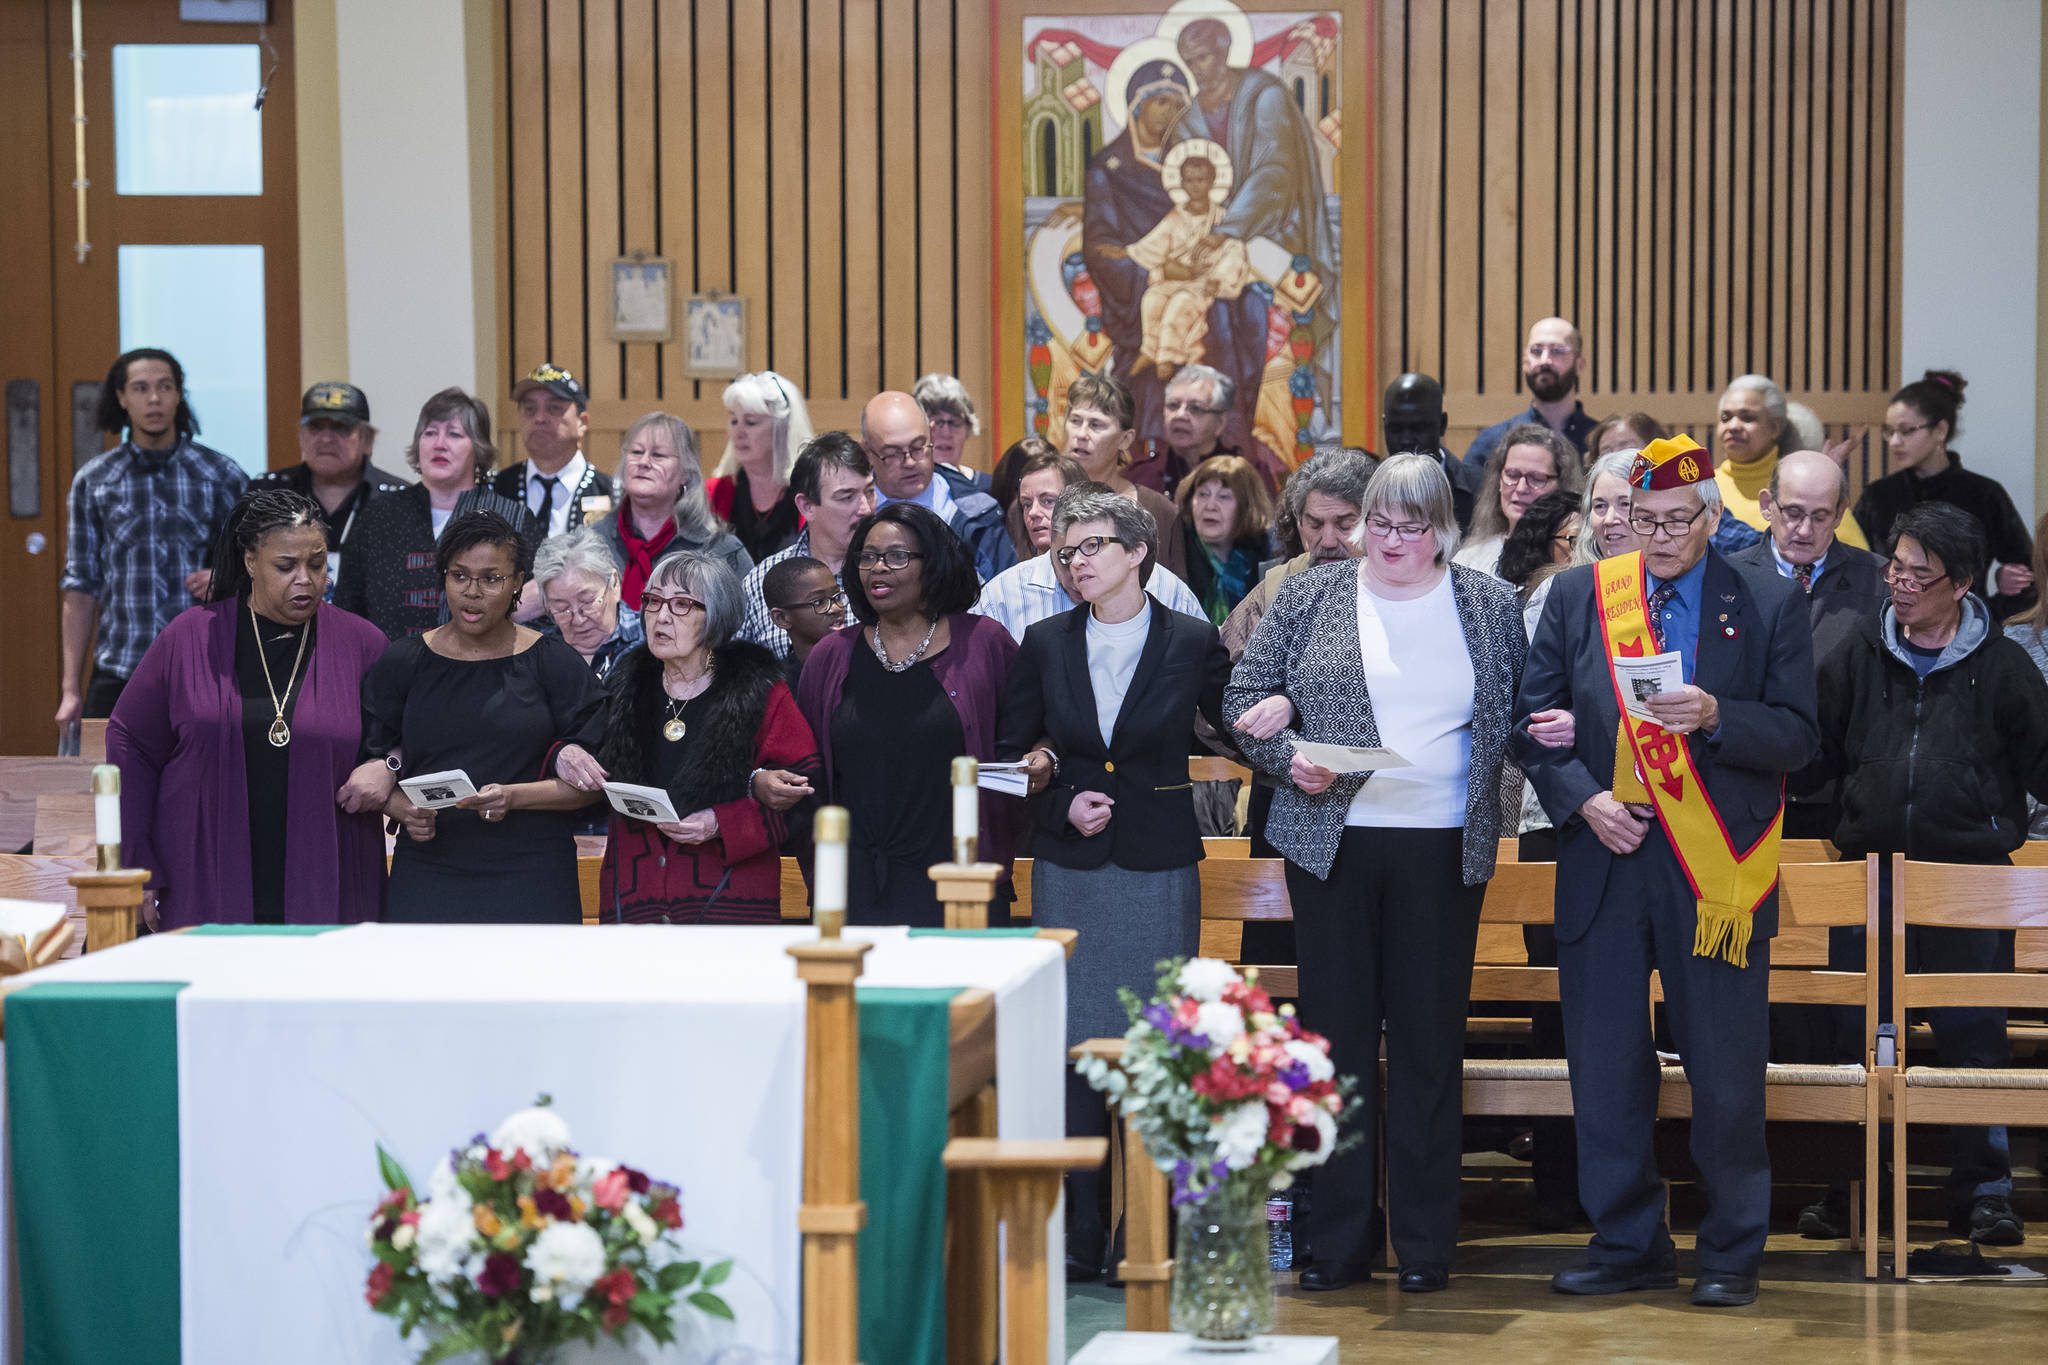 Juneau residents link arms as they sing “We Shall Overcome” at the Dr. Martin Luther King Jr. 2019 Community Celebration at St. Paul’s Catholic Church on Monday, Jan. 21, 2019. (Michael Penn | Juneau Empire)